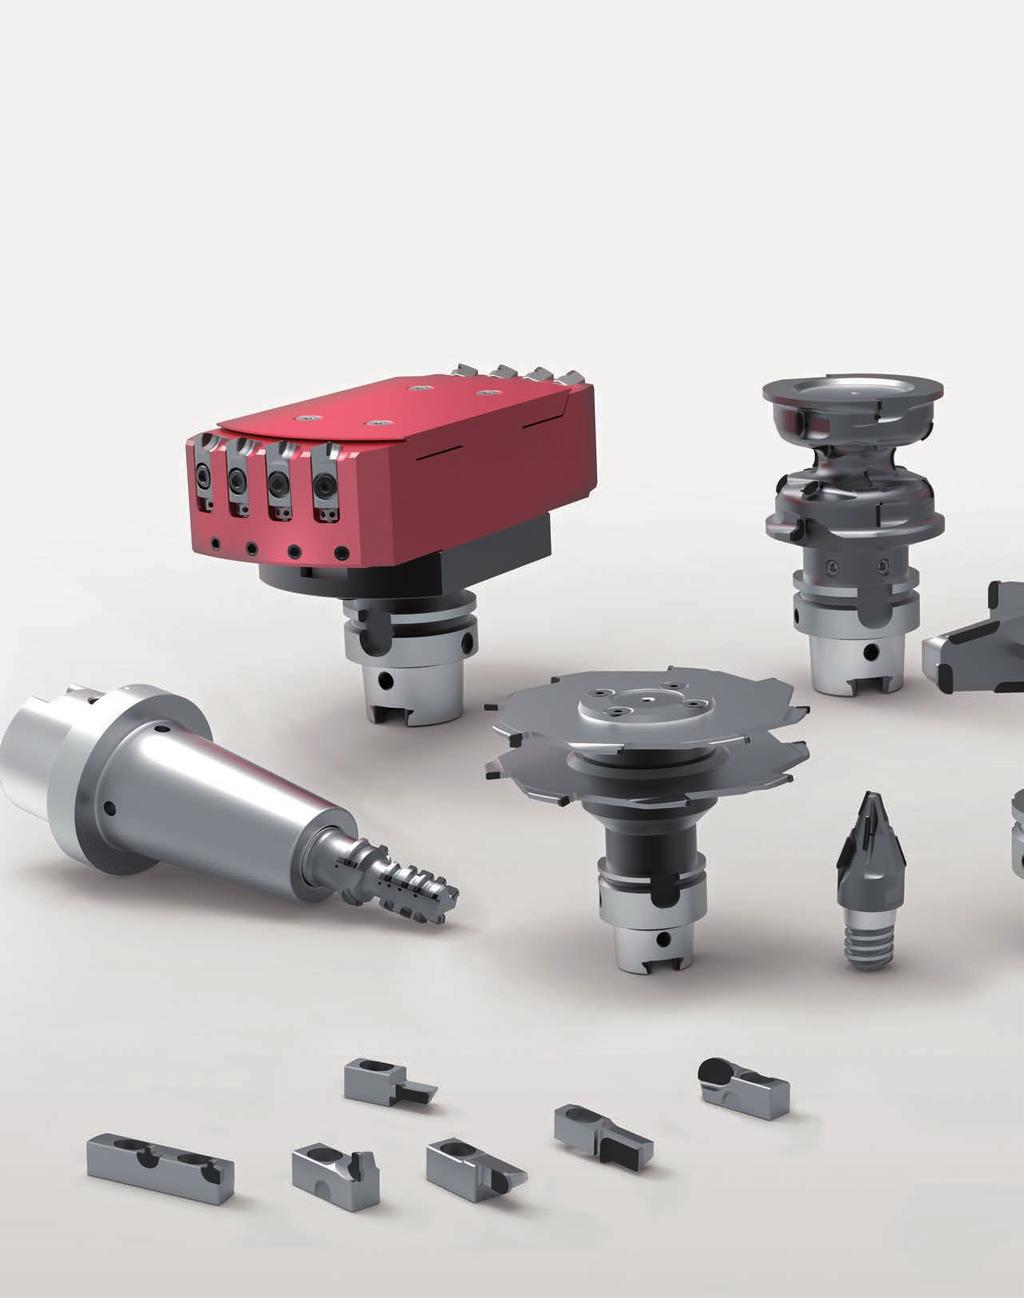 4 CUSTOM SOLUTIONS PCD custom tools for face milling and circular milling As an addition to the standard series, custom solutions for PCD milling tools are also often produced at MAPAL for a special